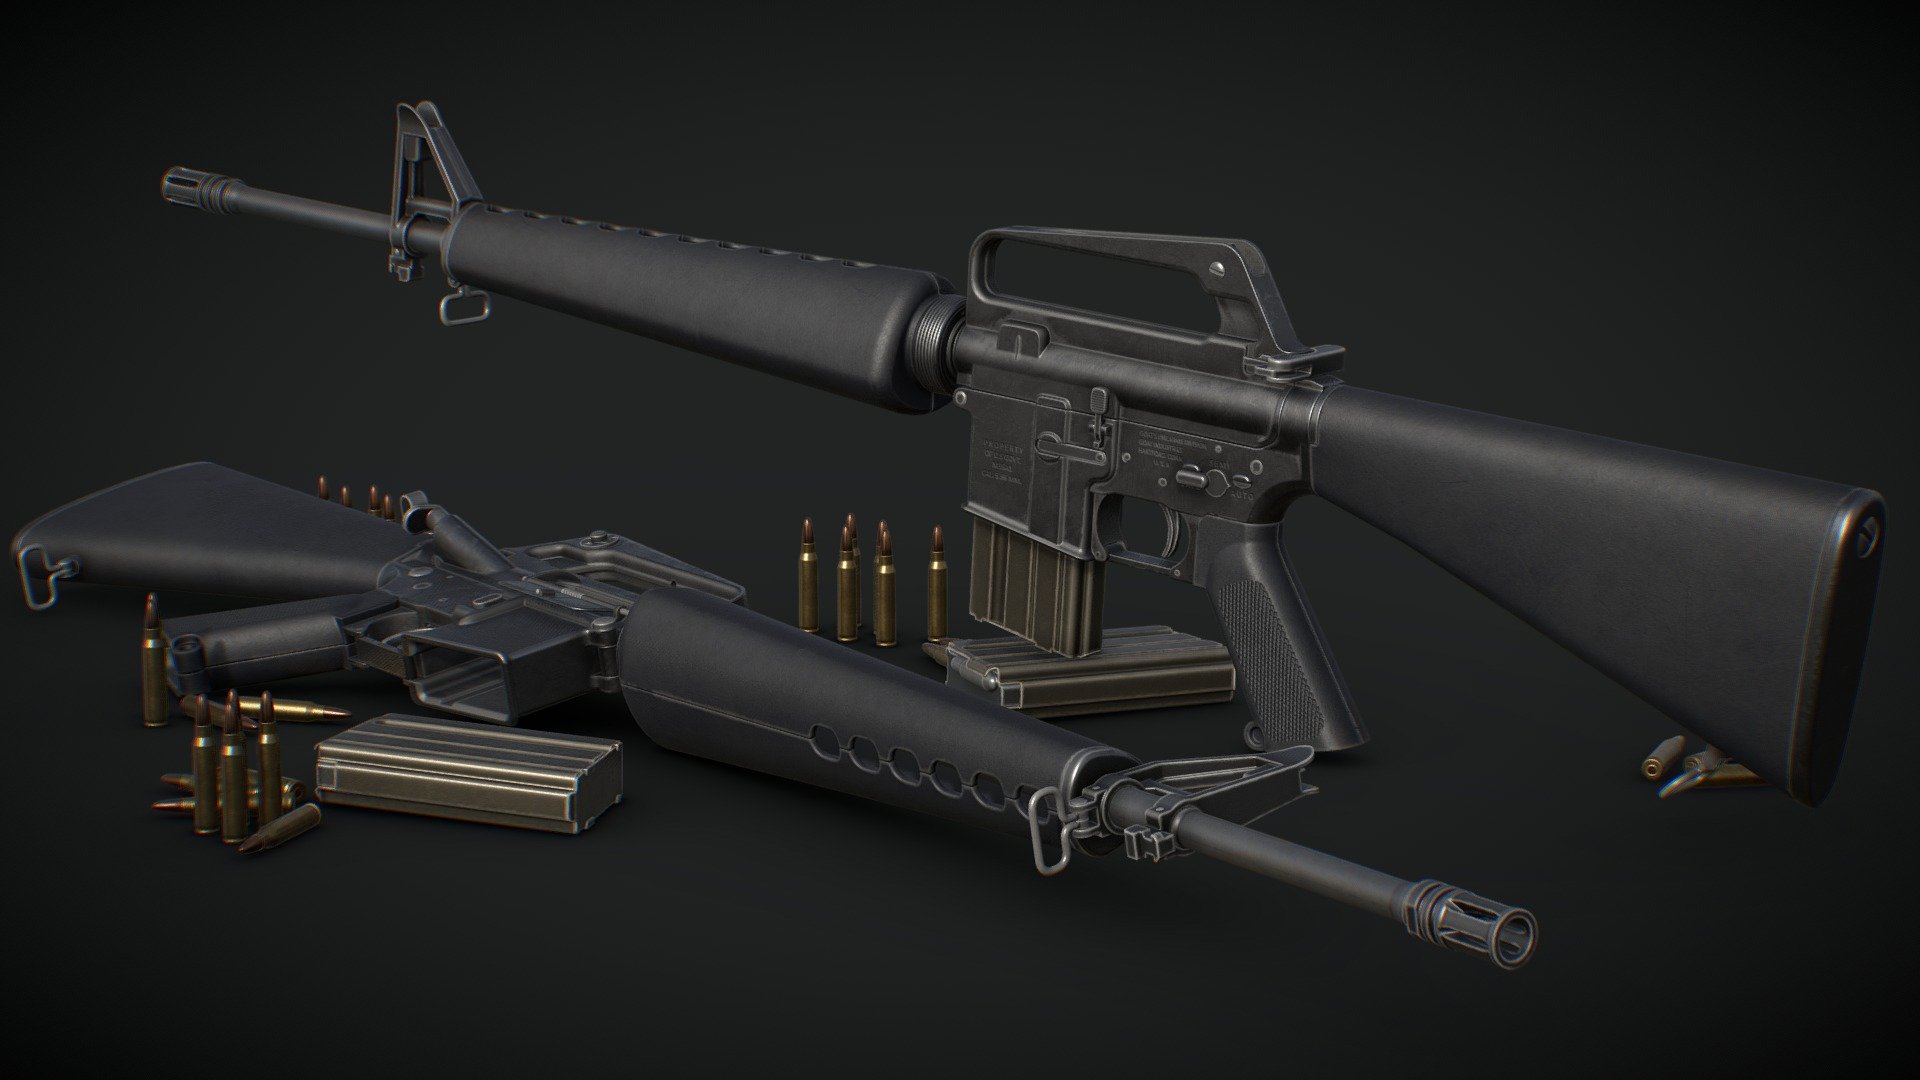 Parts are separated to ease rigging. Parts include


5.56 bullet
5.56 casing
Bolt
Bolt catch
Charging handle
Dust cover
Magazine
Mag follower
Mag release
Rear sight
Selector
Sling swivels
Trigger

Textures included:


2K and 4K textures
2K Unreal packed textures
4K baked textures for custom texturing

Also comes with a blend file that includes the basemesh, lowpoly and highpoly 3d model